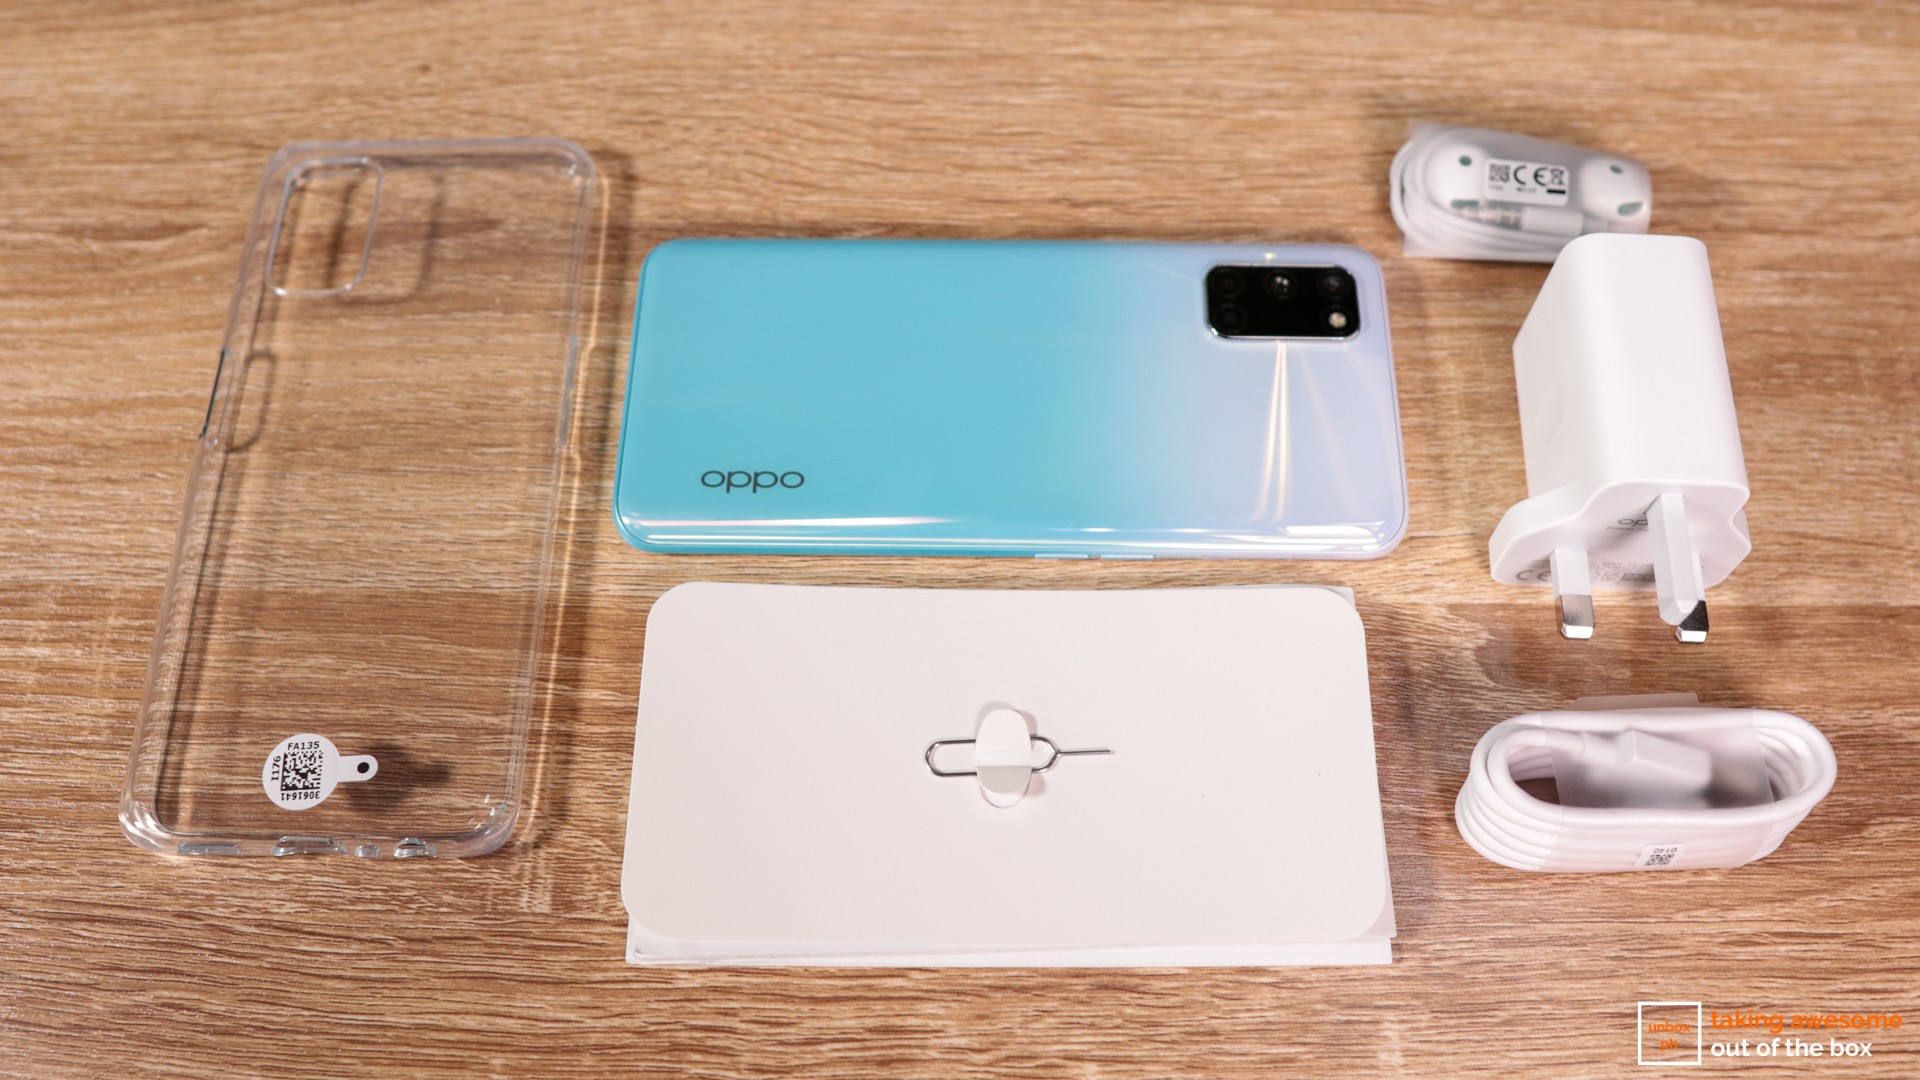 Oppo A92 unboxing with the phone, charger, earphones, silicon cover, and user manual